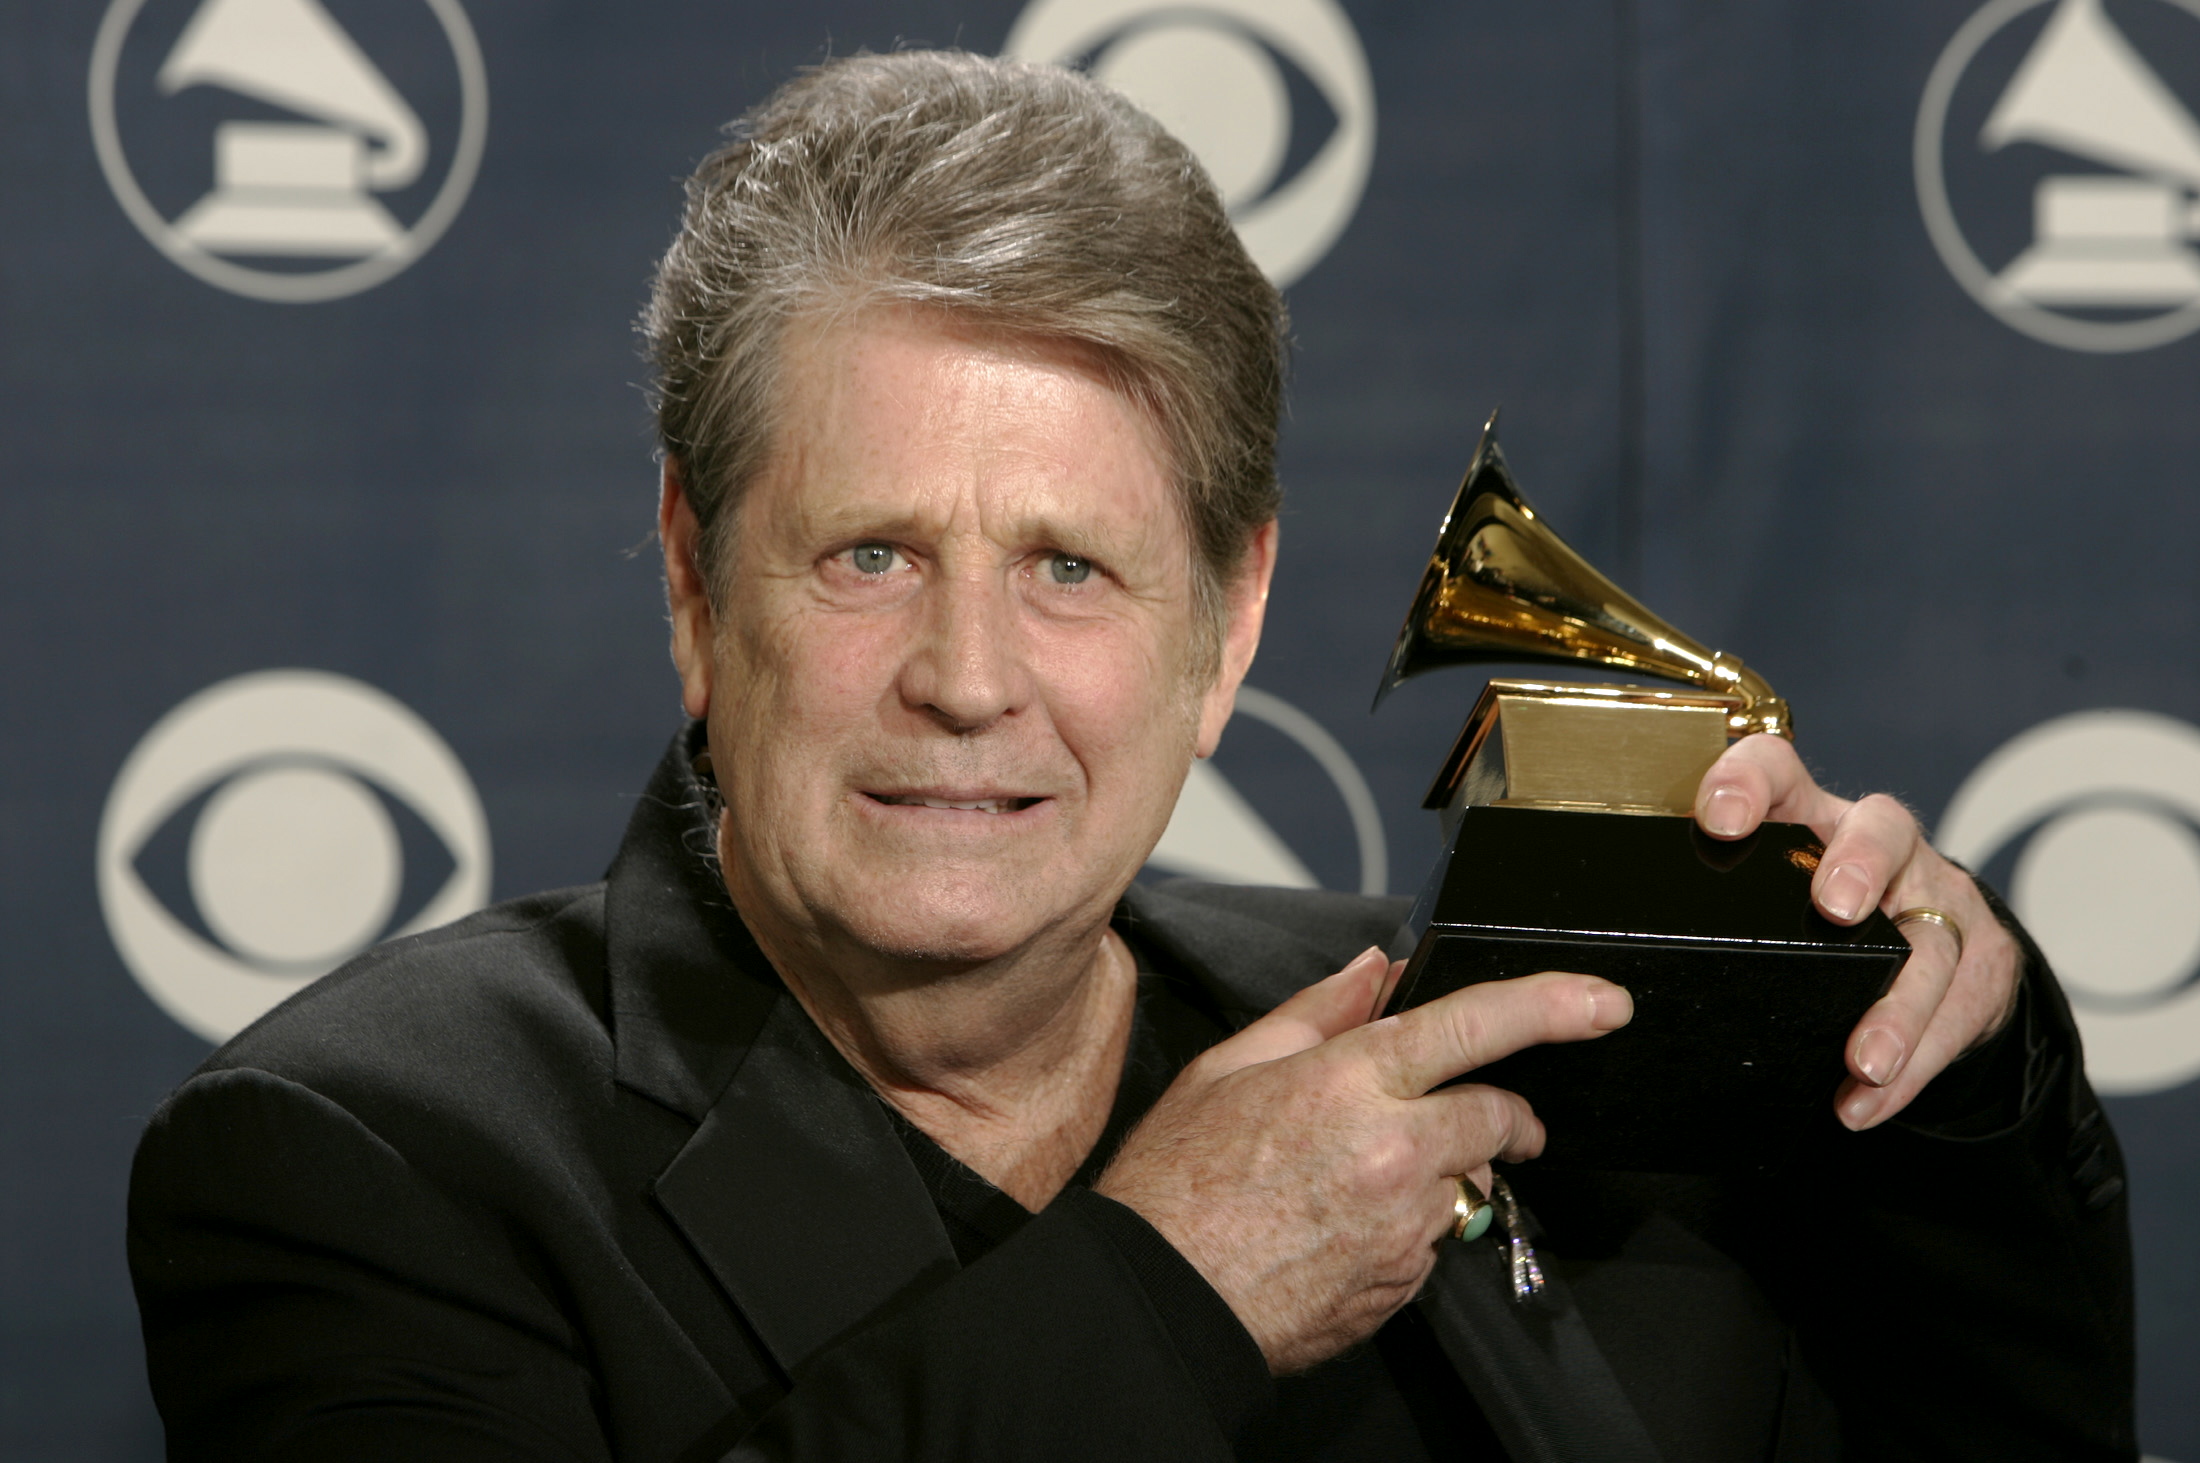 Former Beach Boy Brian Wilson holds his award backstage at the 47th annual Grammy Awards at the Staples Center in Los Angeles February 13, 2005. Wilson won for Best Rock Instrumental Performance for "Mrs. O'Leary's Cow.